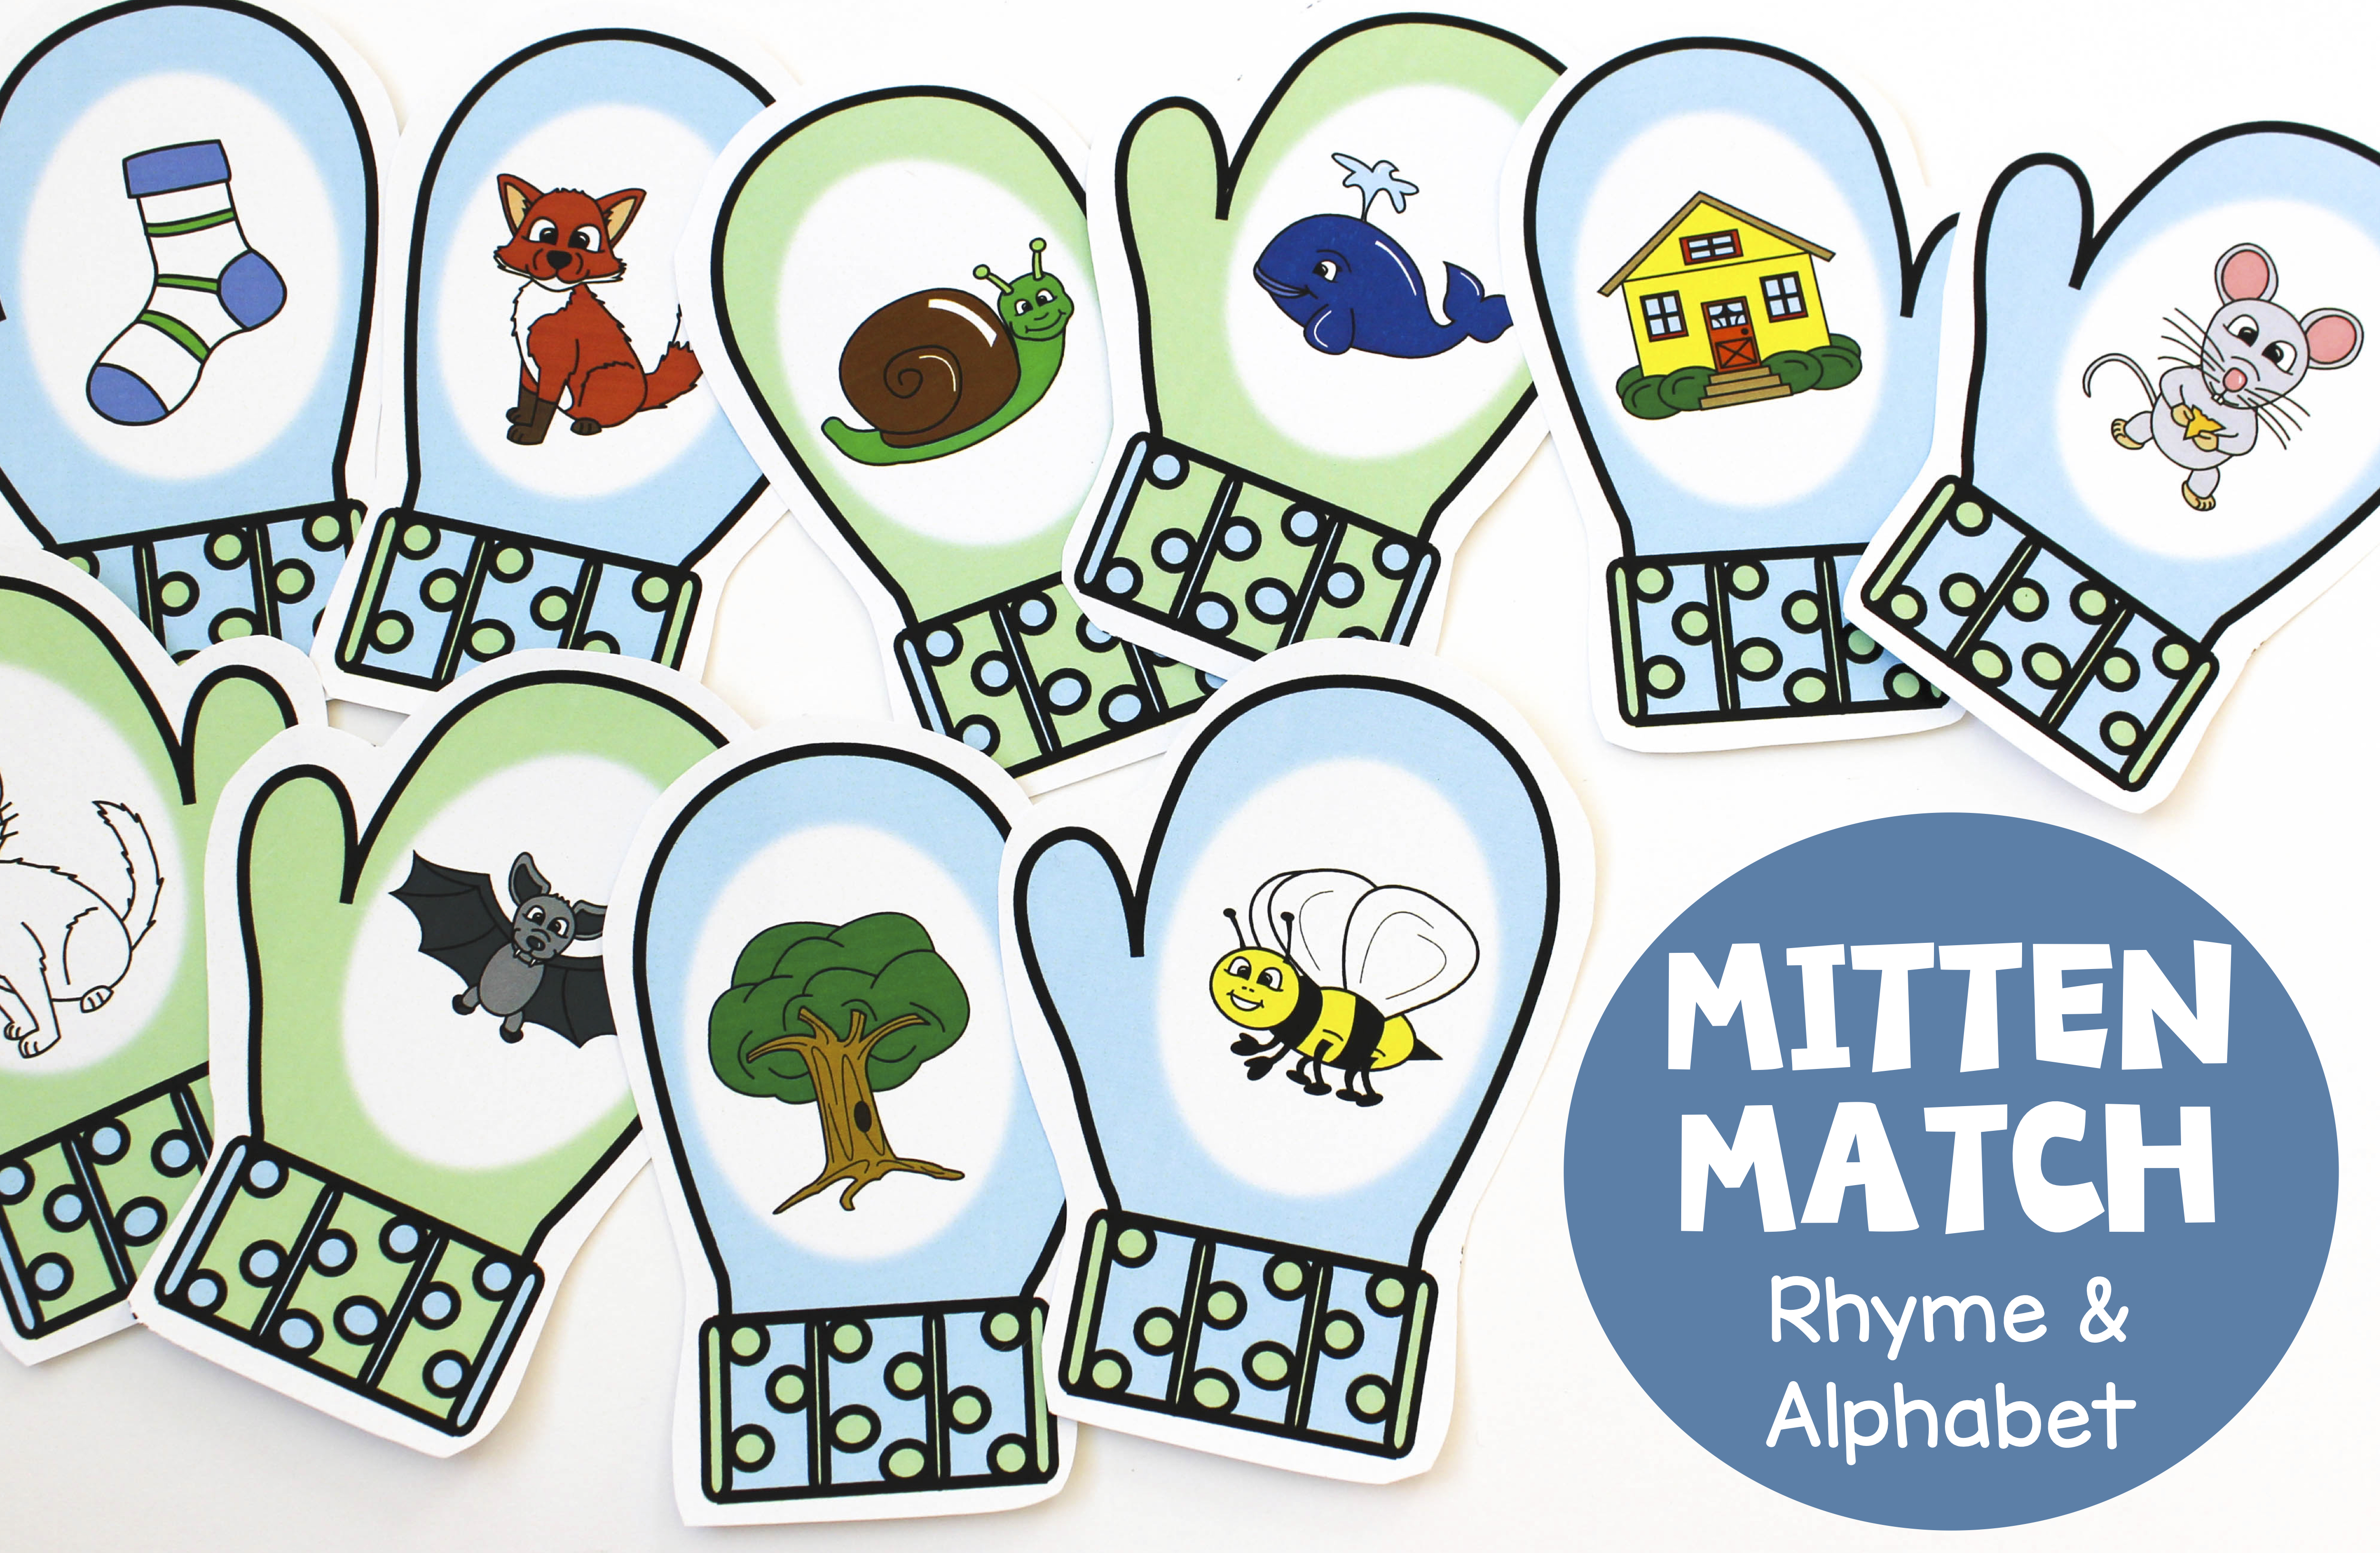 mitten-match-activities-for-rhyme-and-letters-sounds-make-take-teach